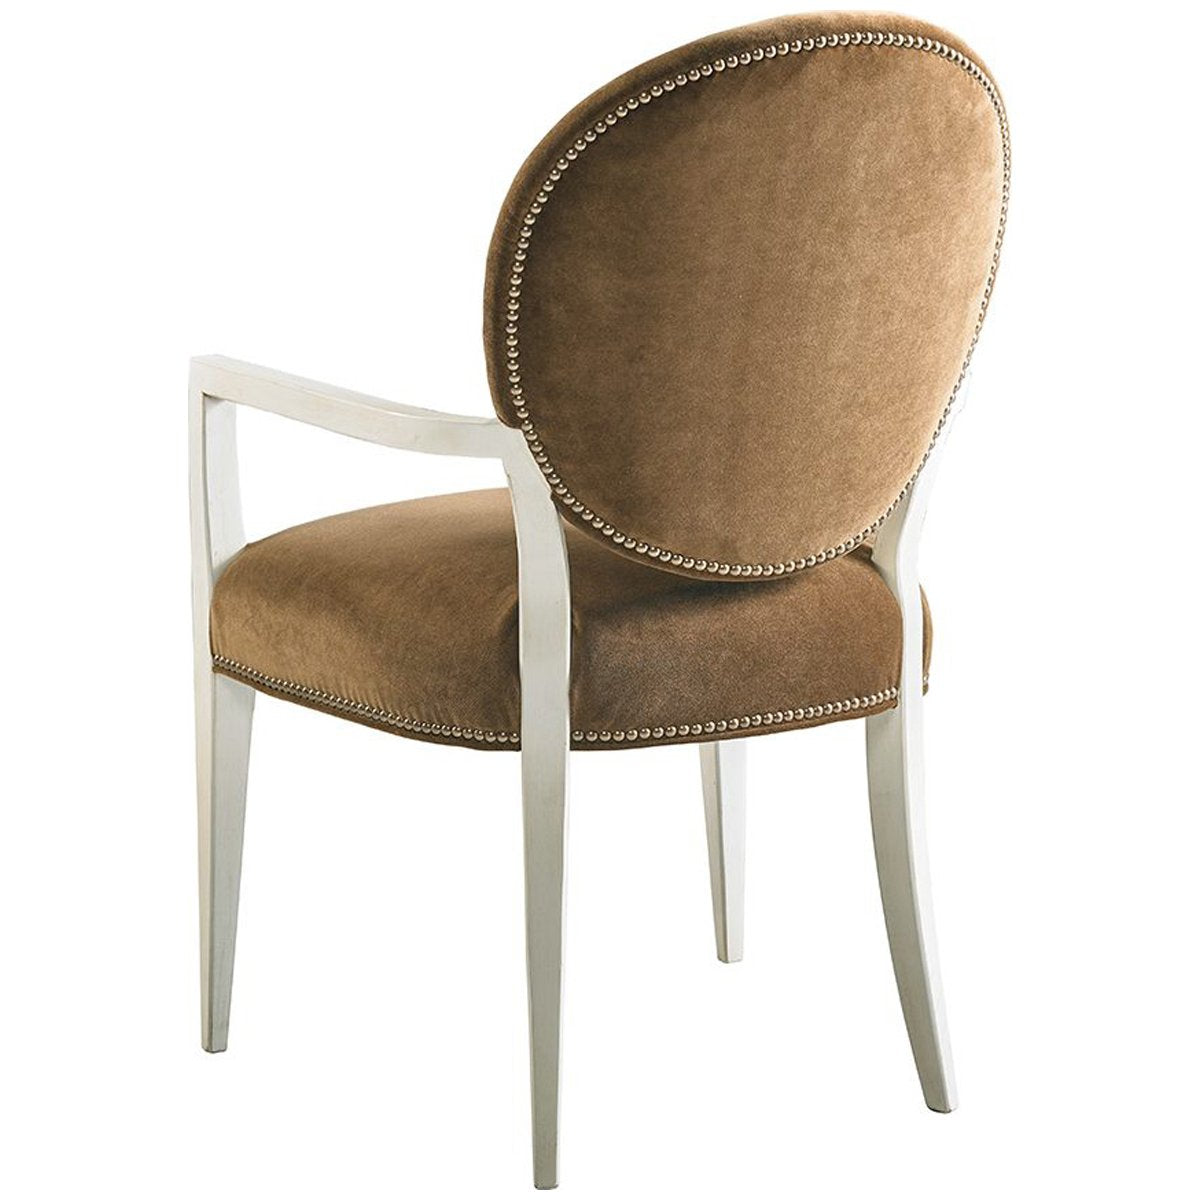 Hickory White Central Park Broadway Washed Linen Arm Chair